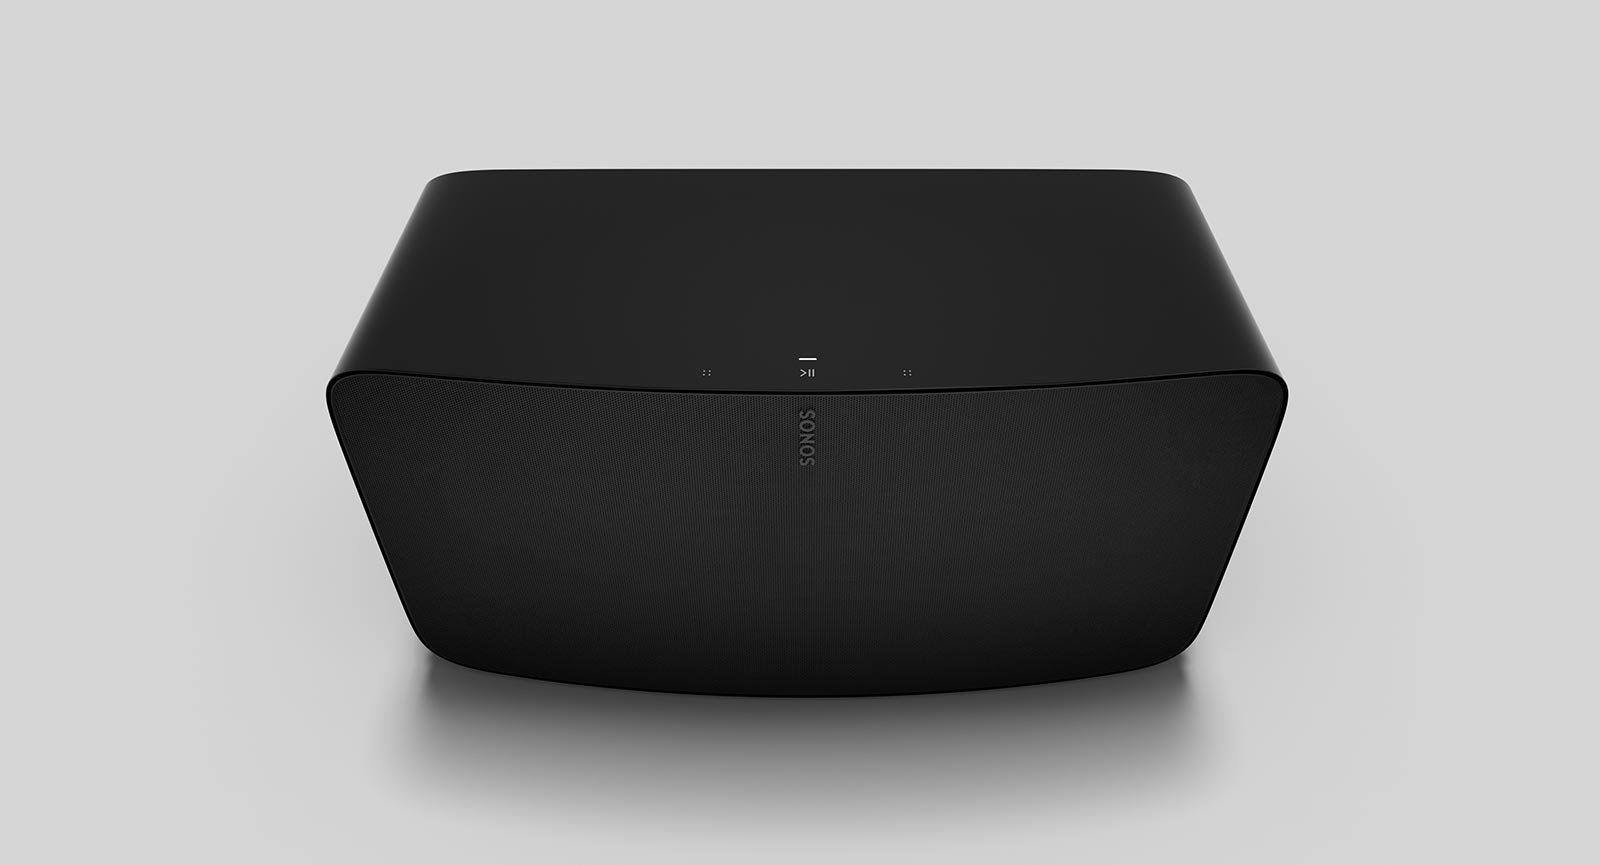 Sonos Play:5 is "Five" with Pickr